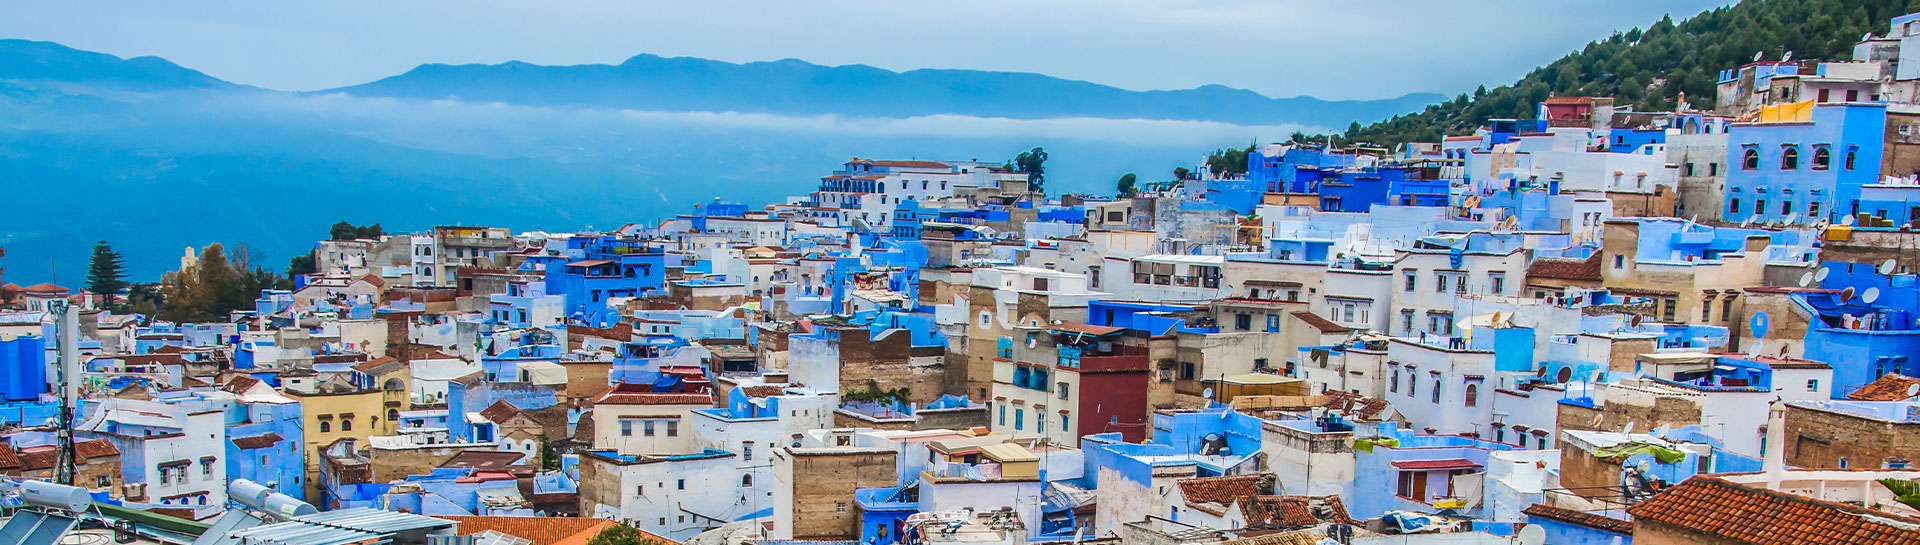 Chefchaouen, information about this popular destination in Morocco by the AFRICA MOROCCO LINK company. 